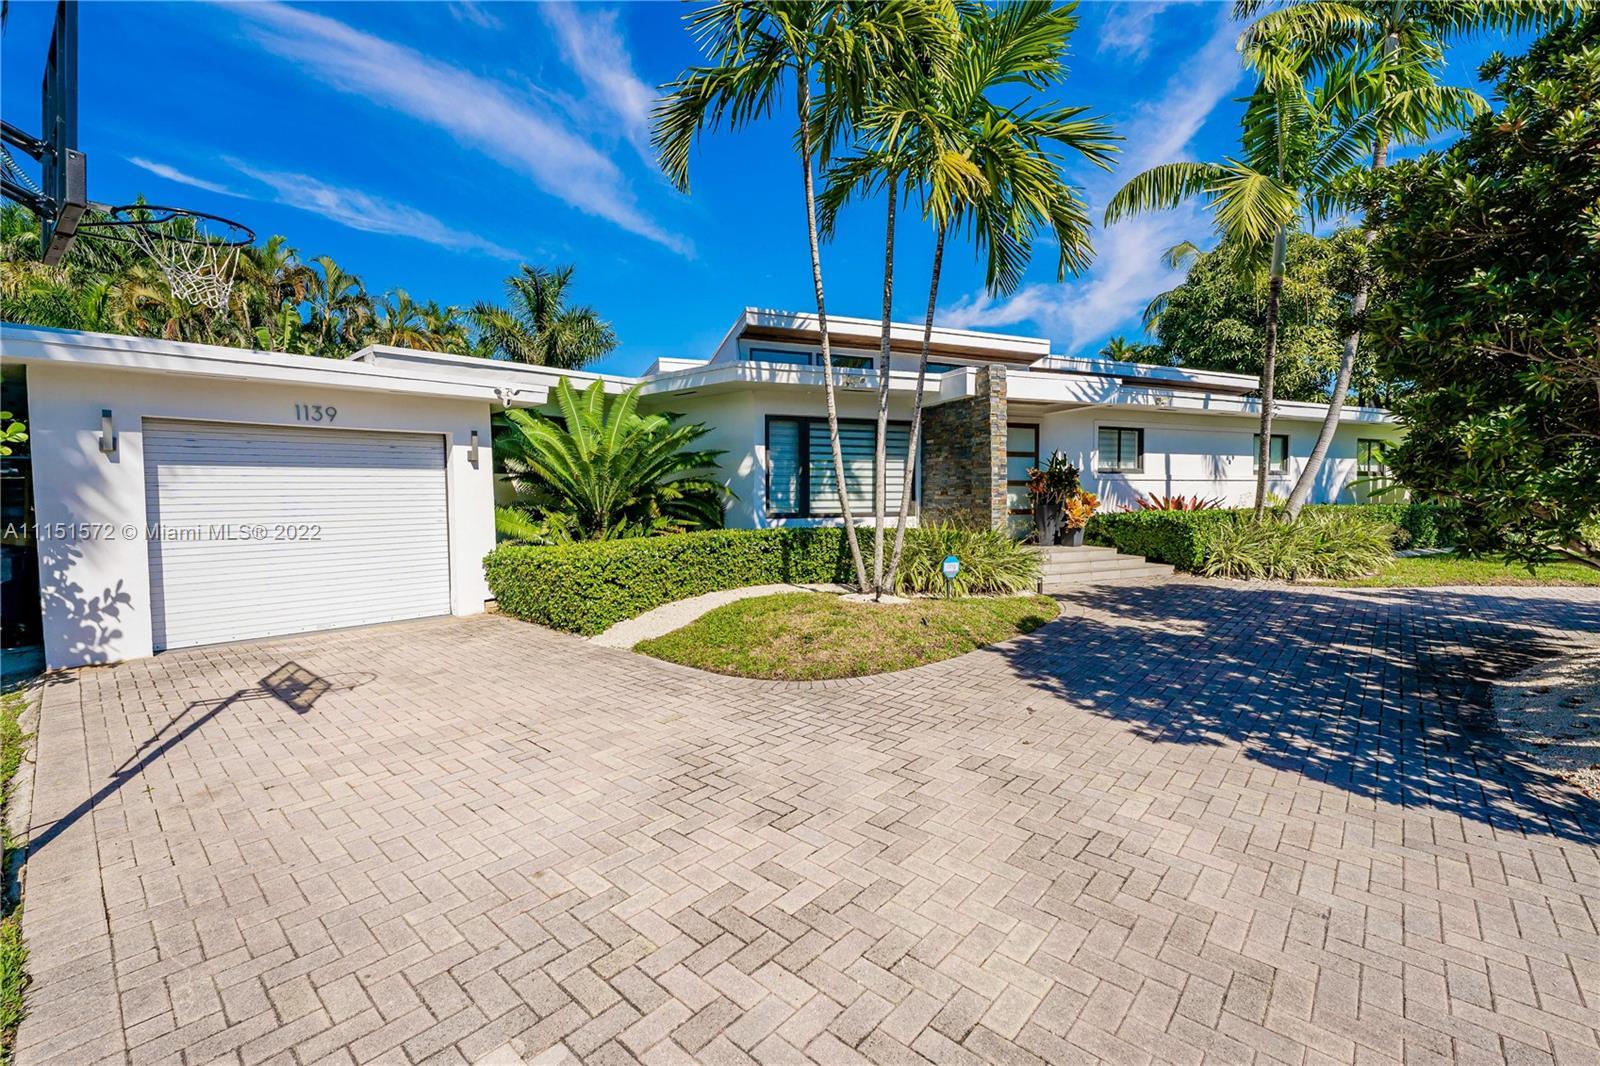 MID CENTURY MODERN GEM IN MIAMI SHORES. A luminous and spacious home with 2,385 SF of total living s